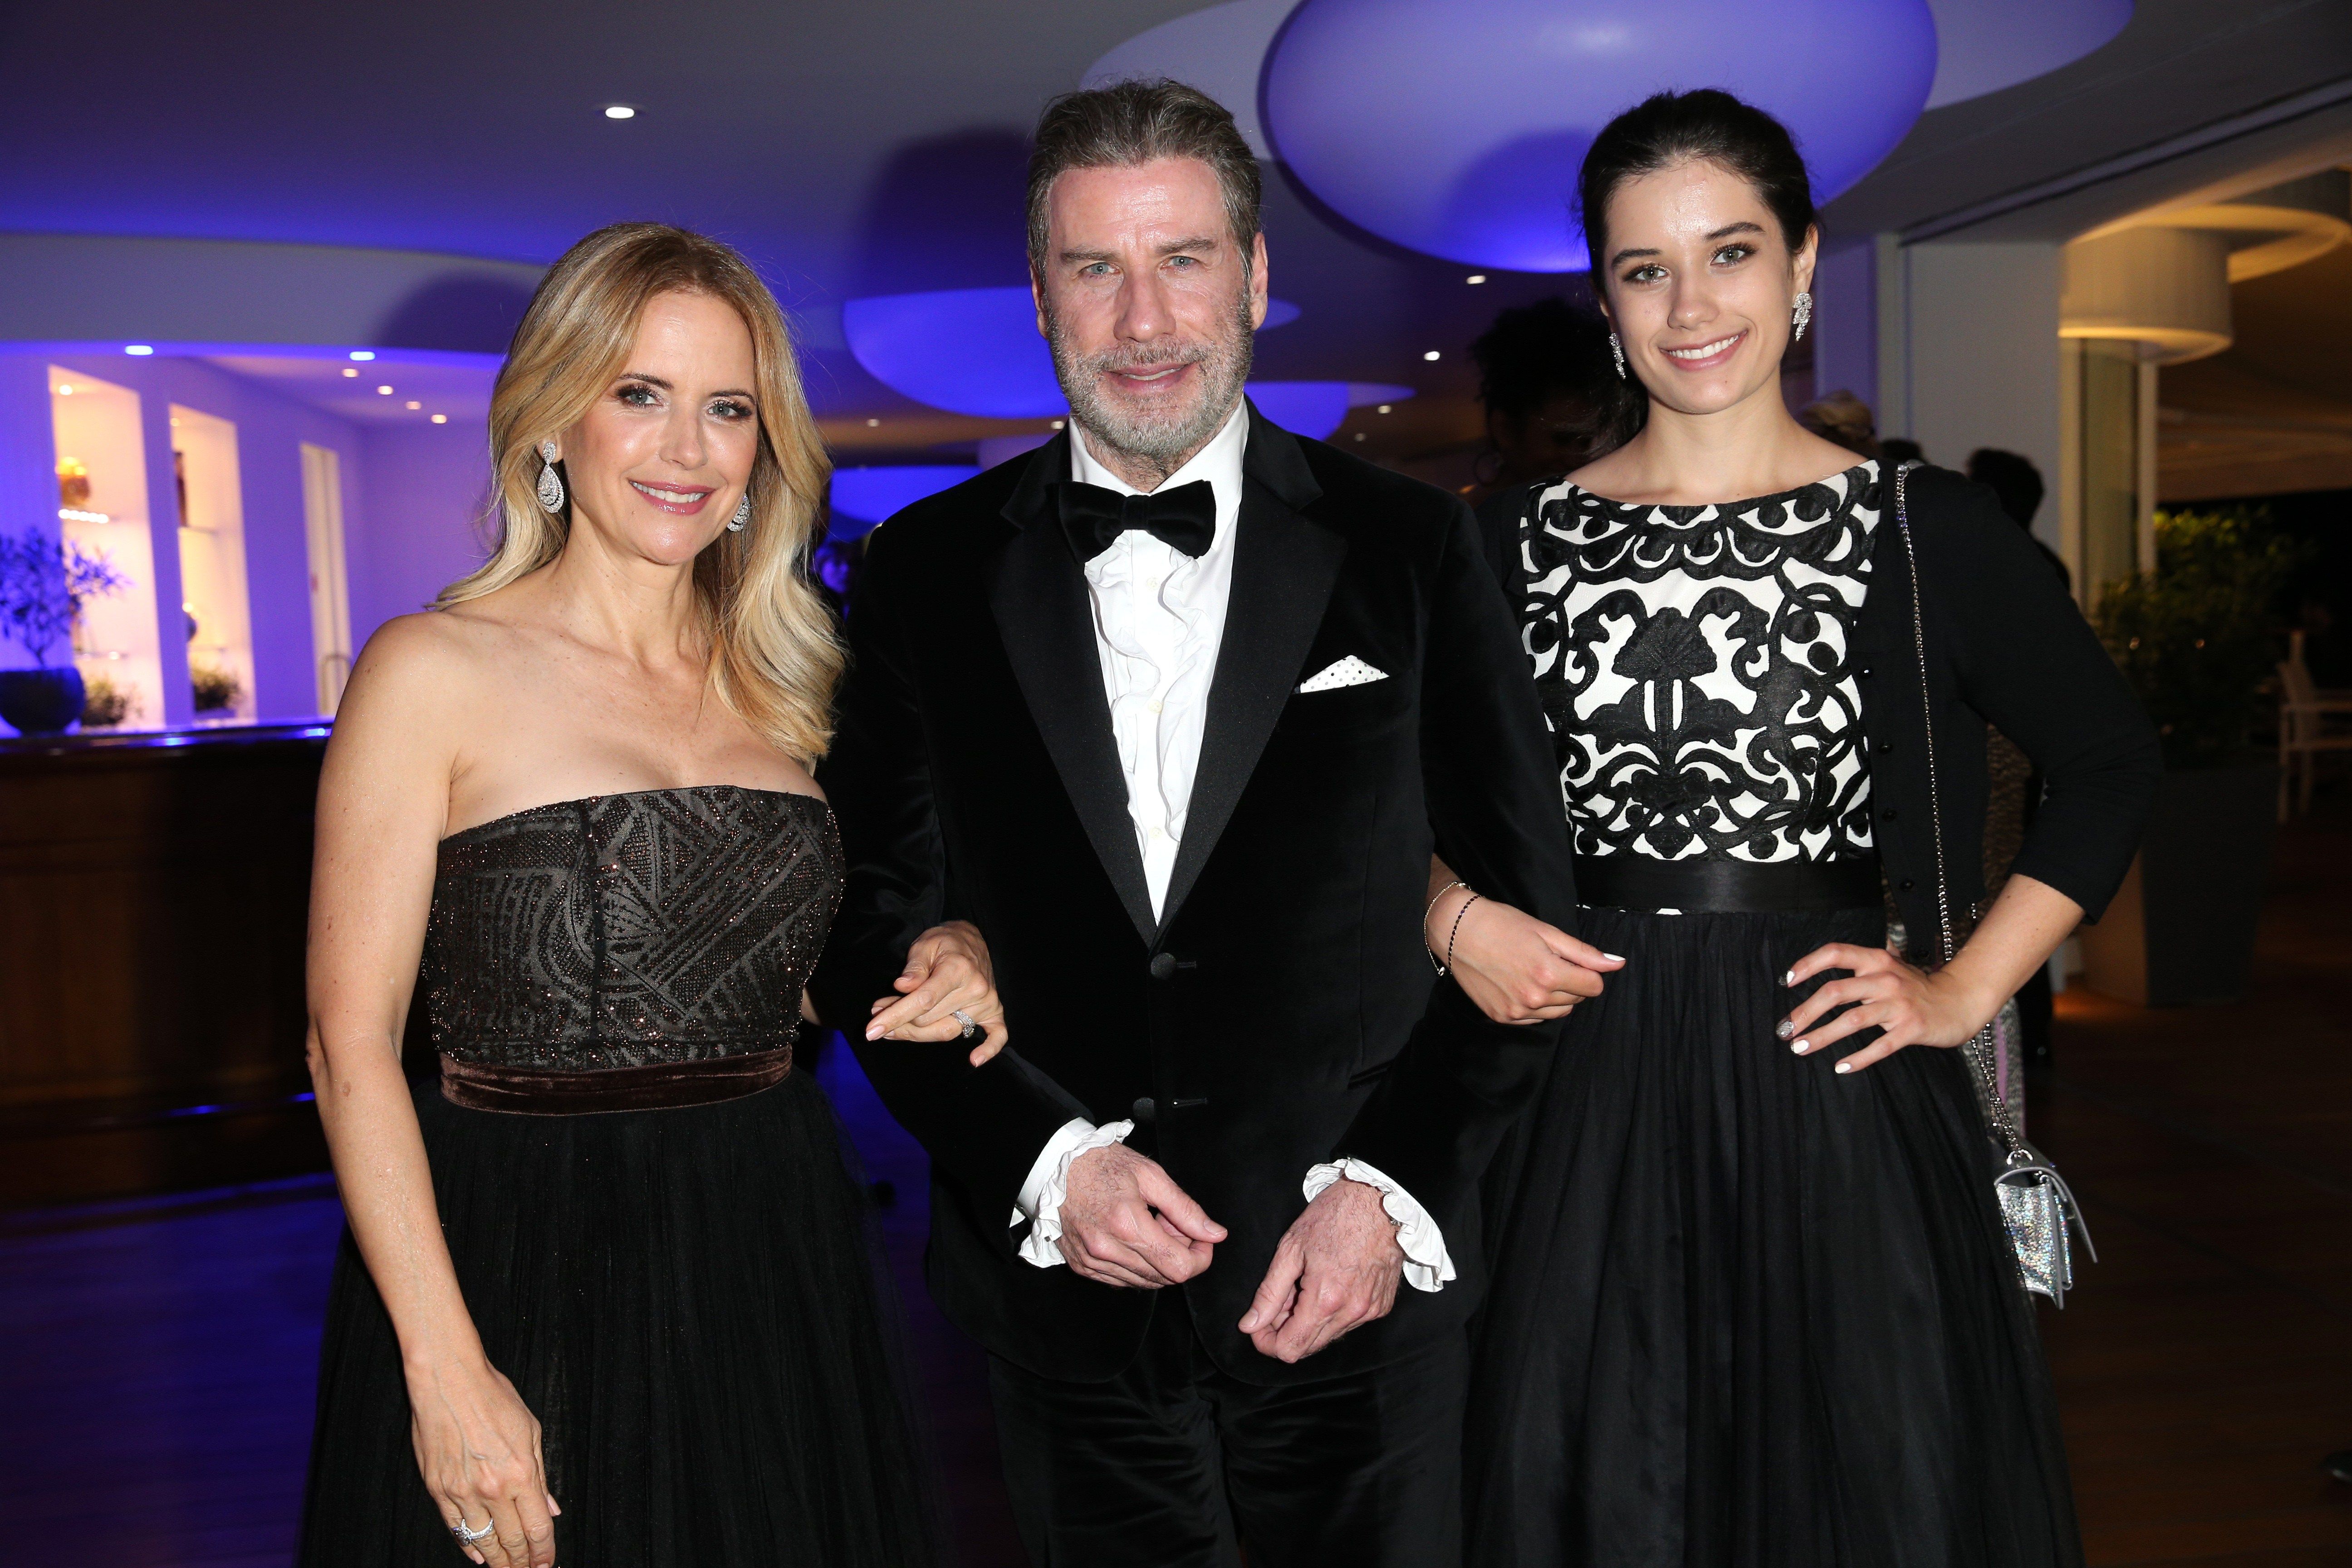 John Travolta, Kelly Preston, and Ella Bleu Travolta during the 71st annual Cannes Film Festival at Hotel du Cap-Eden-Roc on May 15, 2018, in Cap d'Antibes, France. | Source: Getty Images